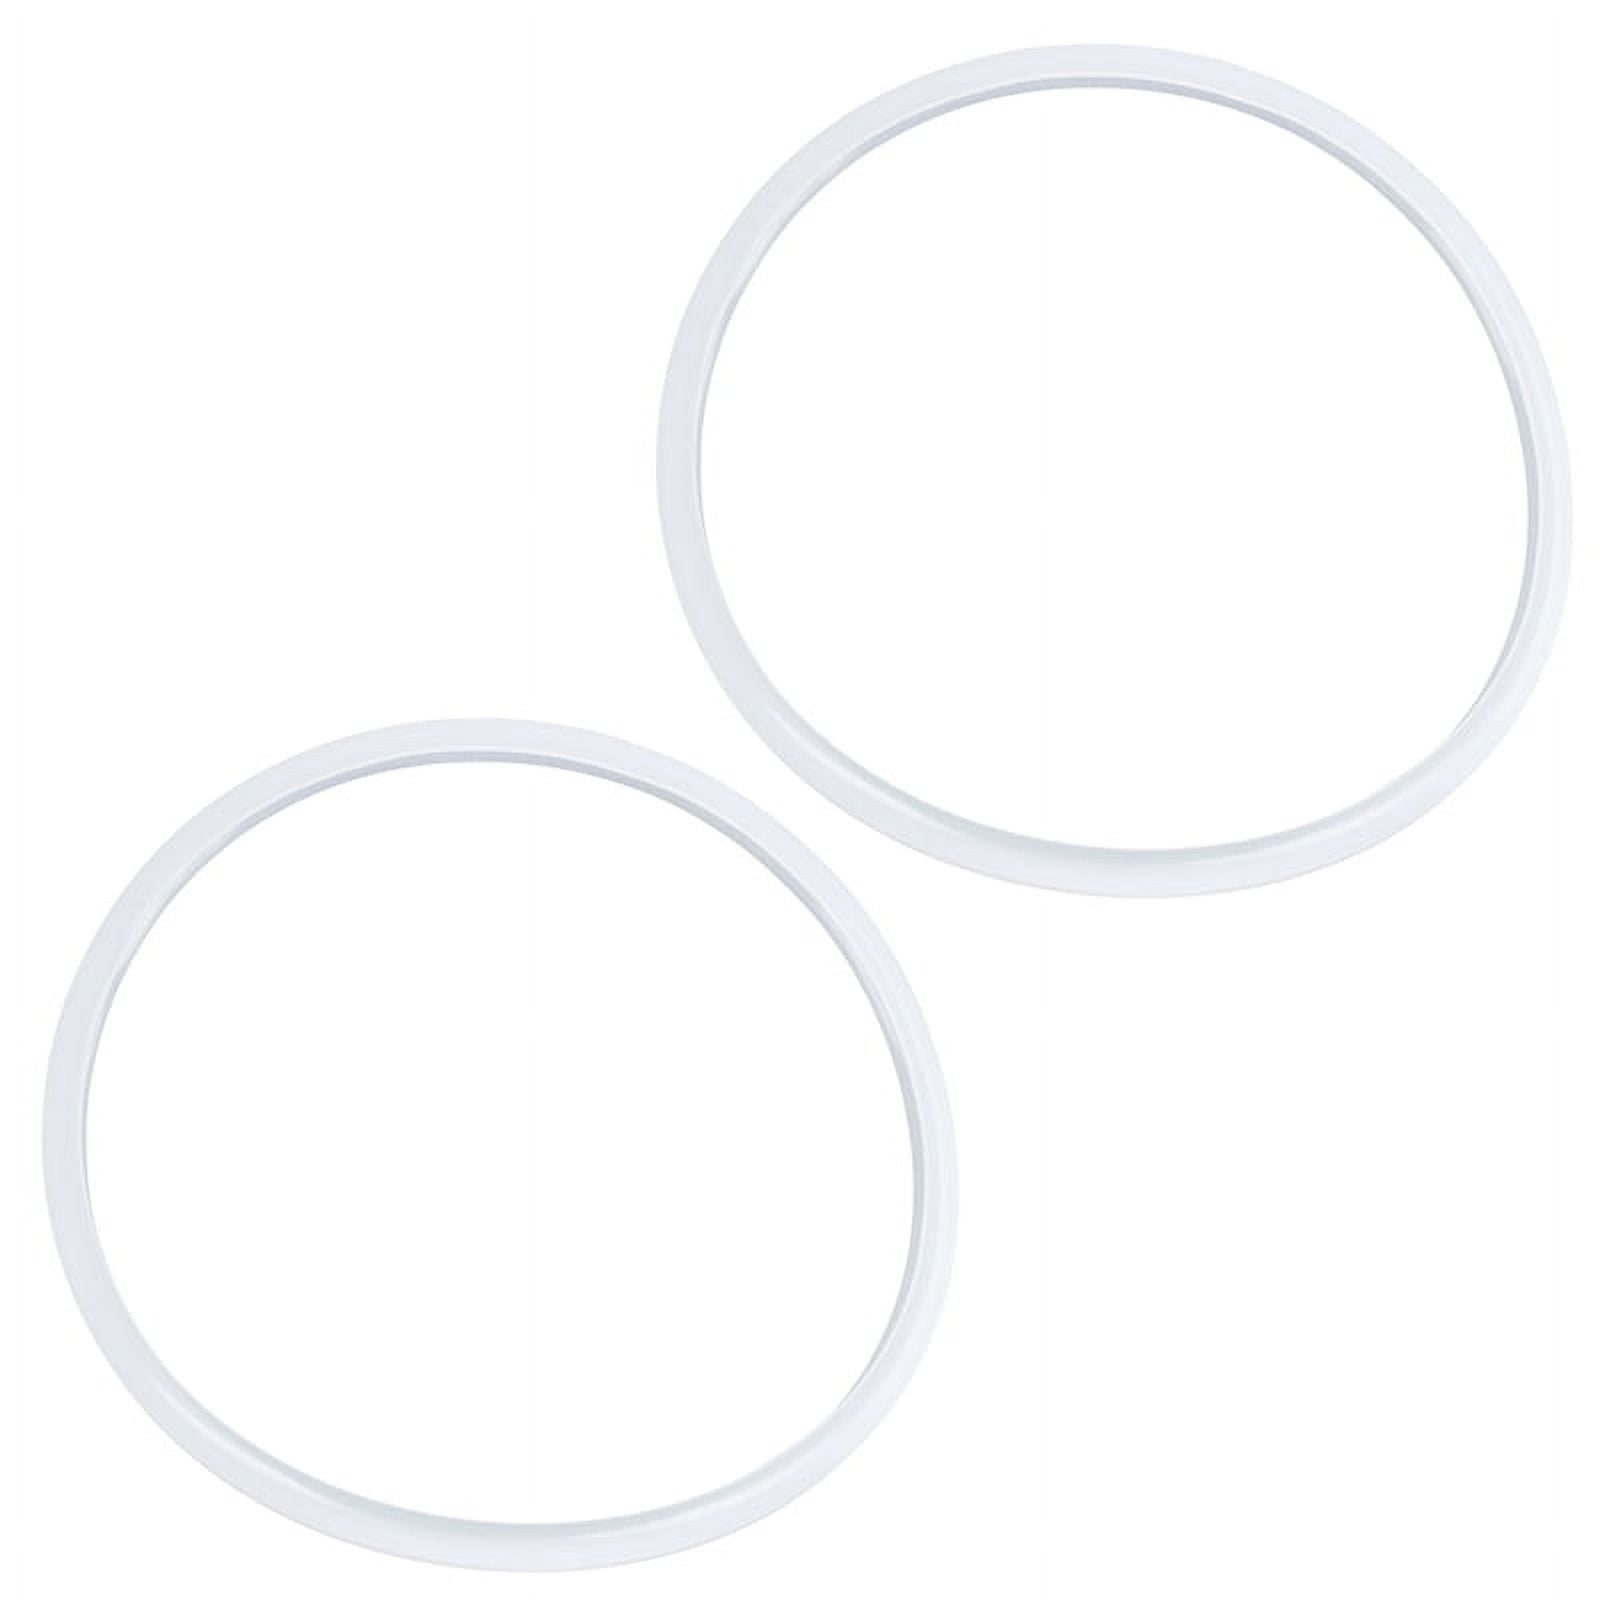 Amazon.com: Silicone Sealing Ring Clear + Pressure Cookers Gasket +  Universal Replacement Floater and Sealer for 5/6 Quart Models : Home &  Kitchen